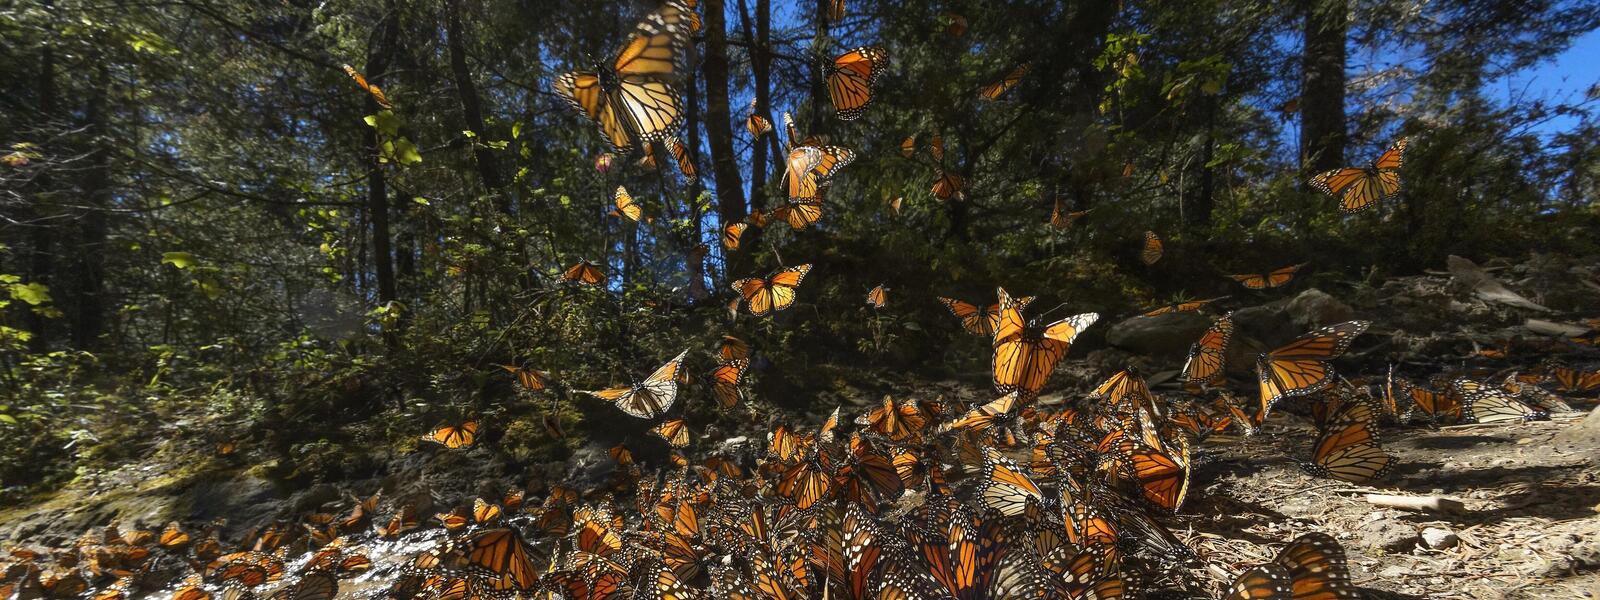 Close up a large gathering of monarch butterflies with some flying off into the air with a forest backdrop